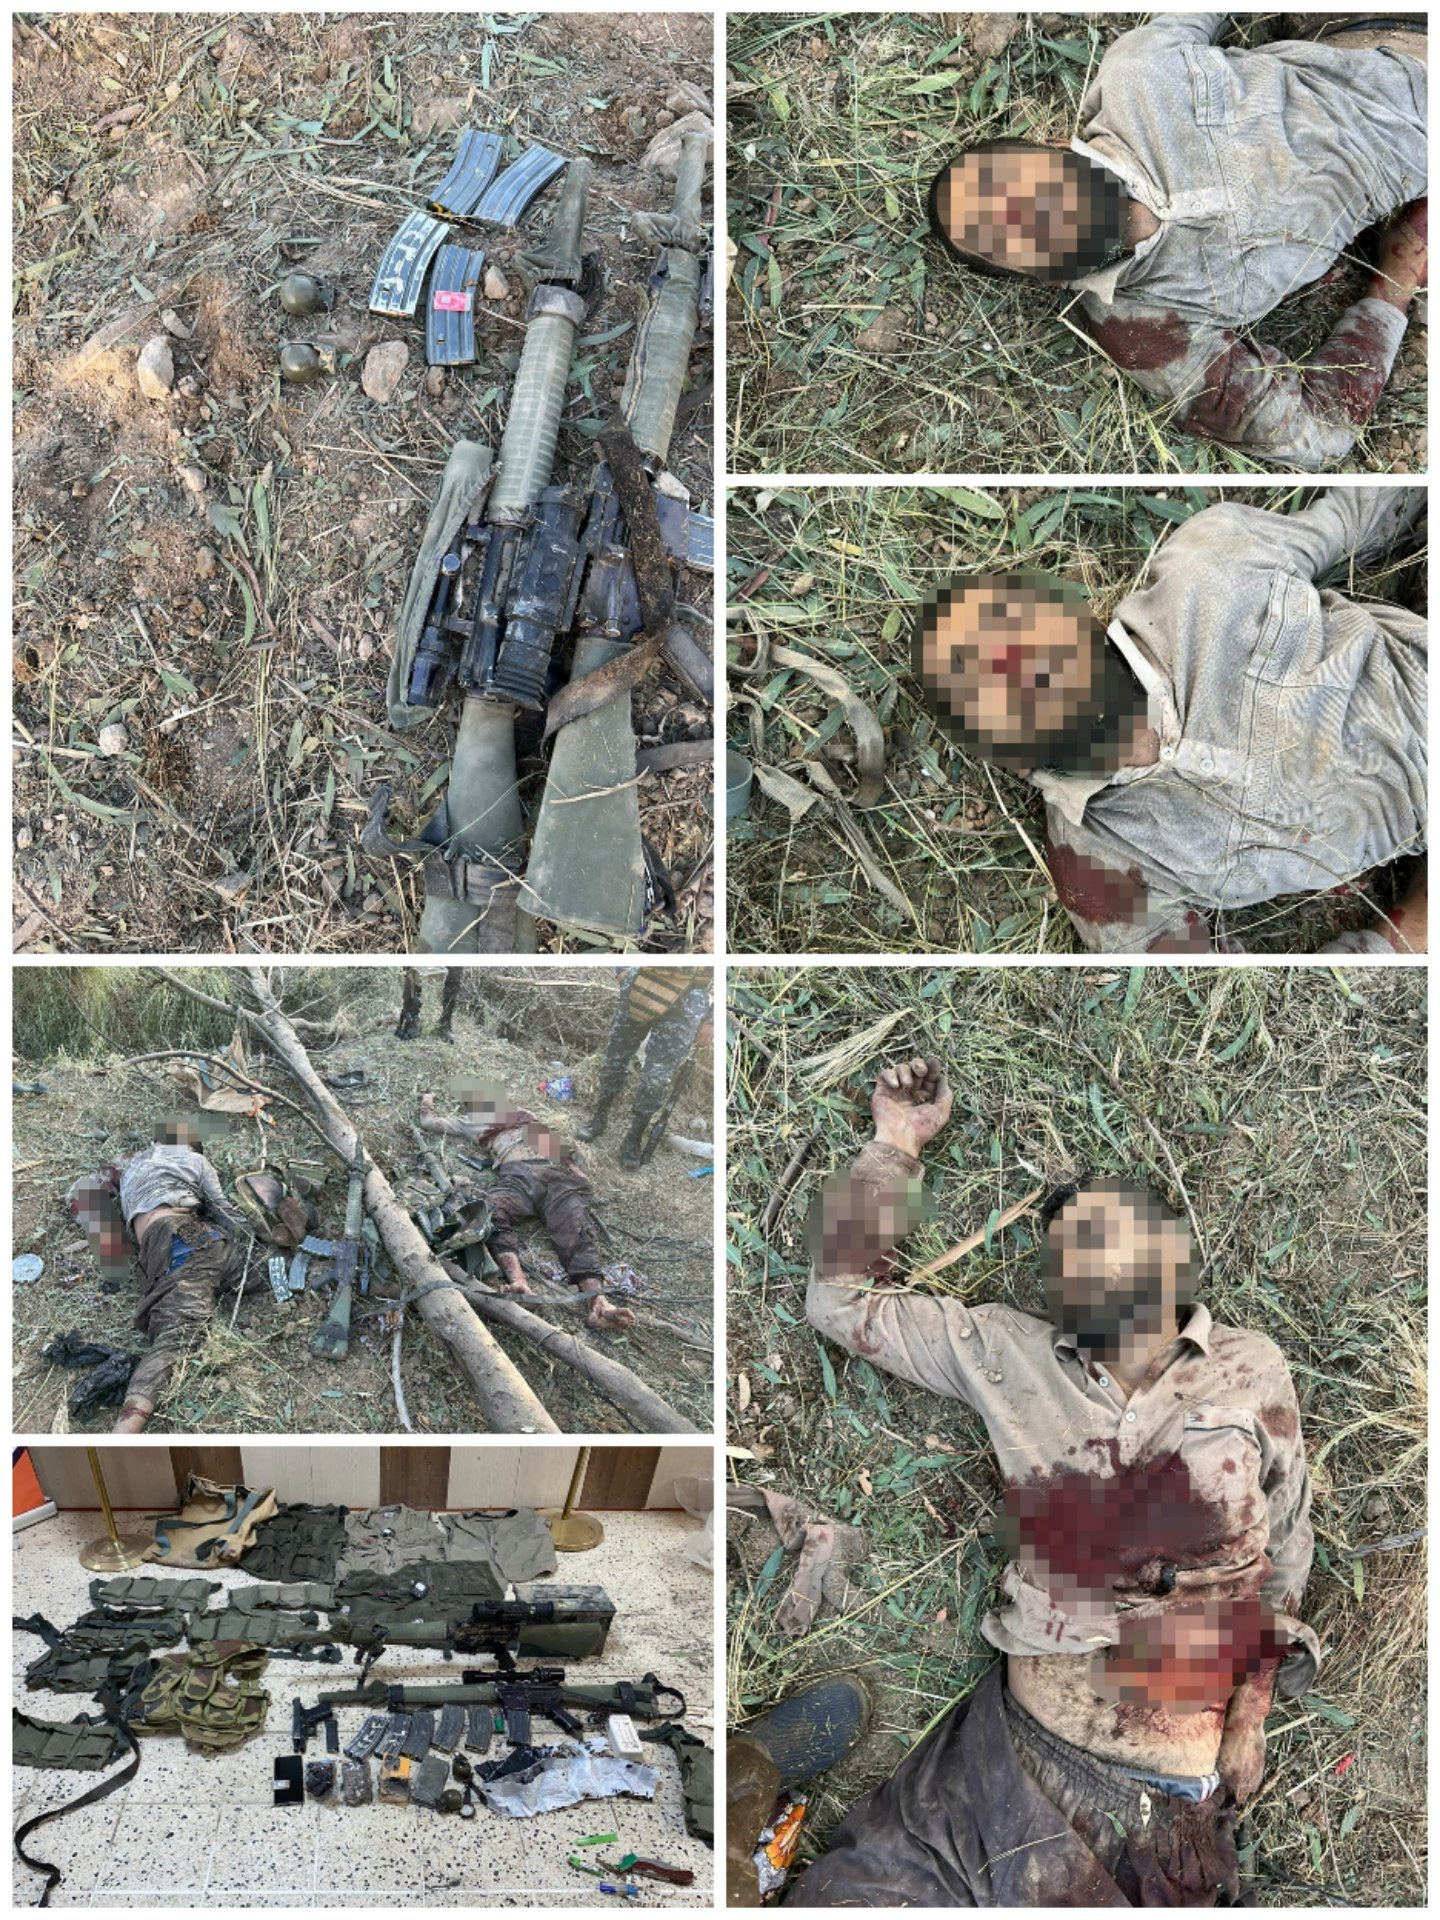 Two ISIS Terrorists Killed In Diyala In Pinpoint Iraqi Strikes (Video, Photos)